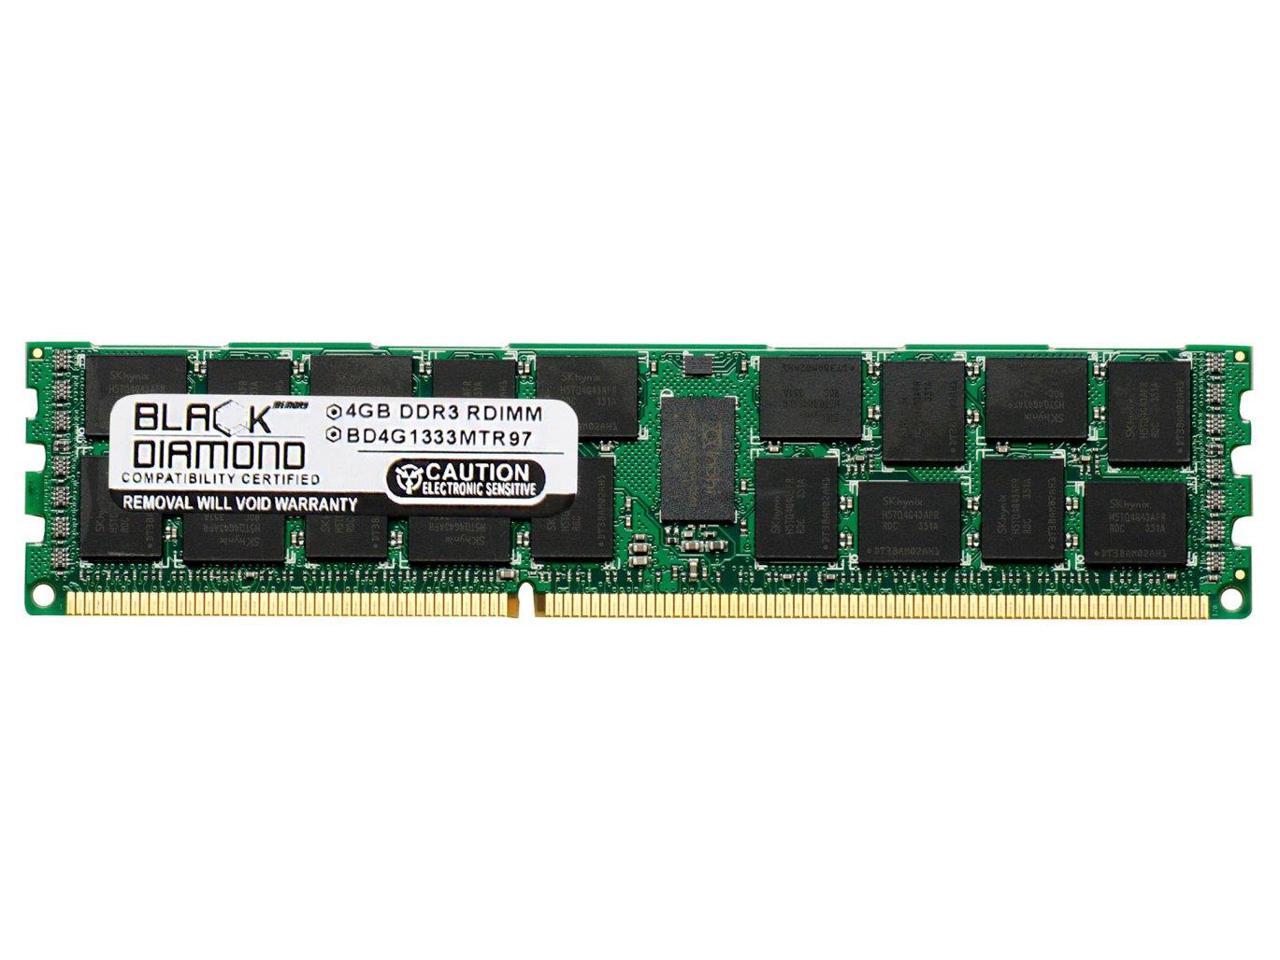 PC2-5300 2GB DDR2-667 RAM Memory Upgrade for The IBM System X 3500 Series x3500 